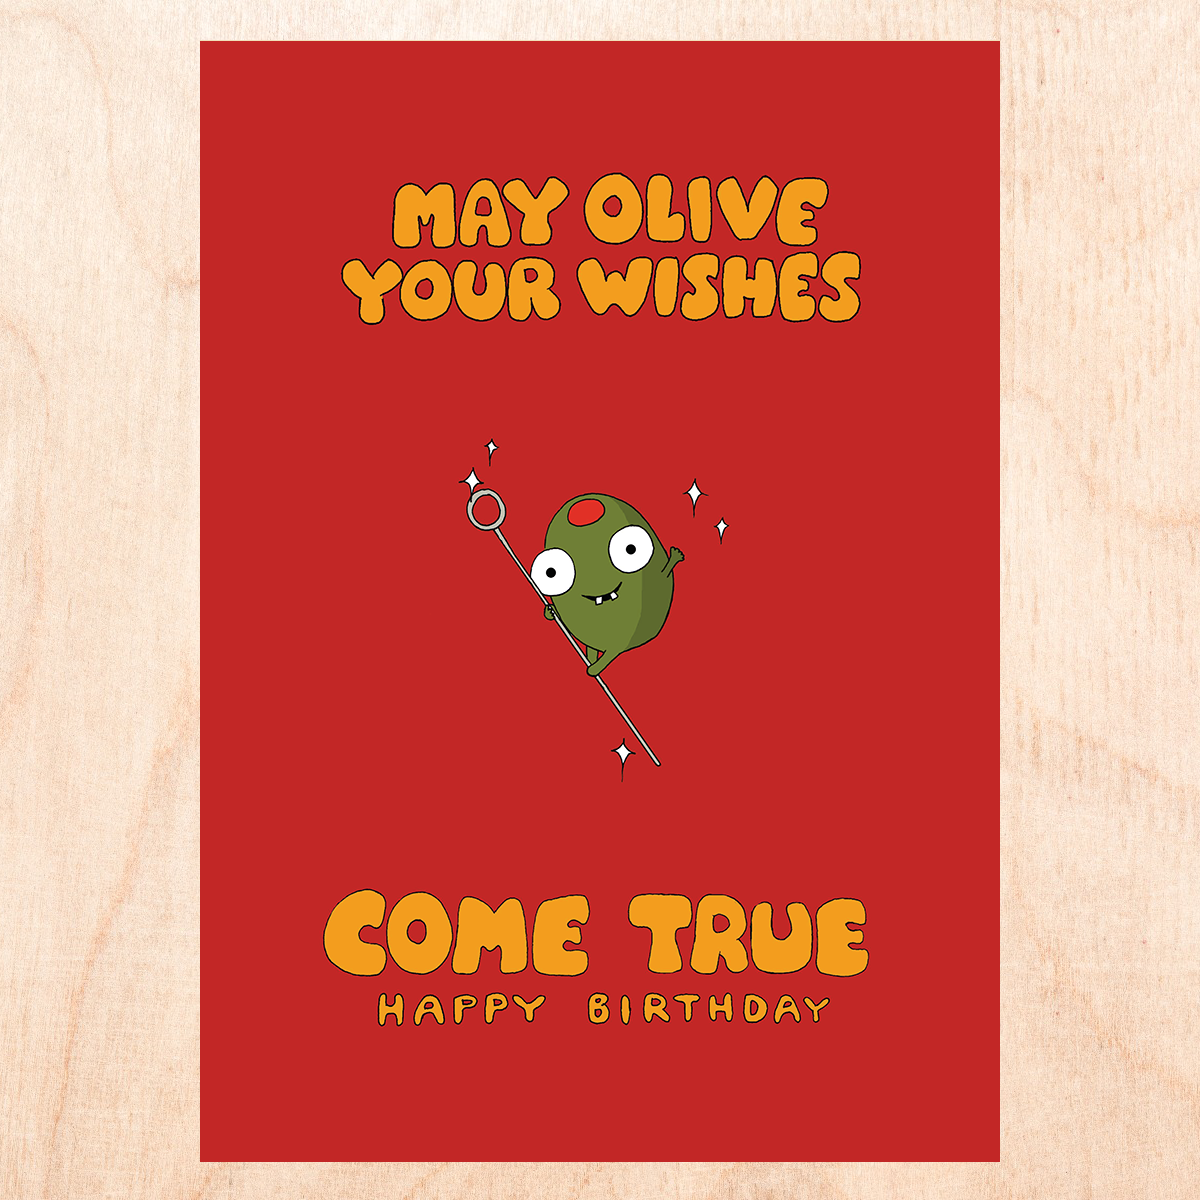 OLIVE YOUR WISHES